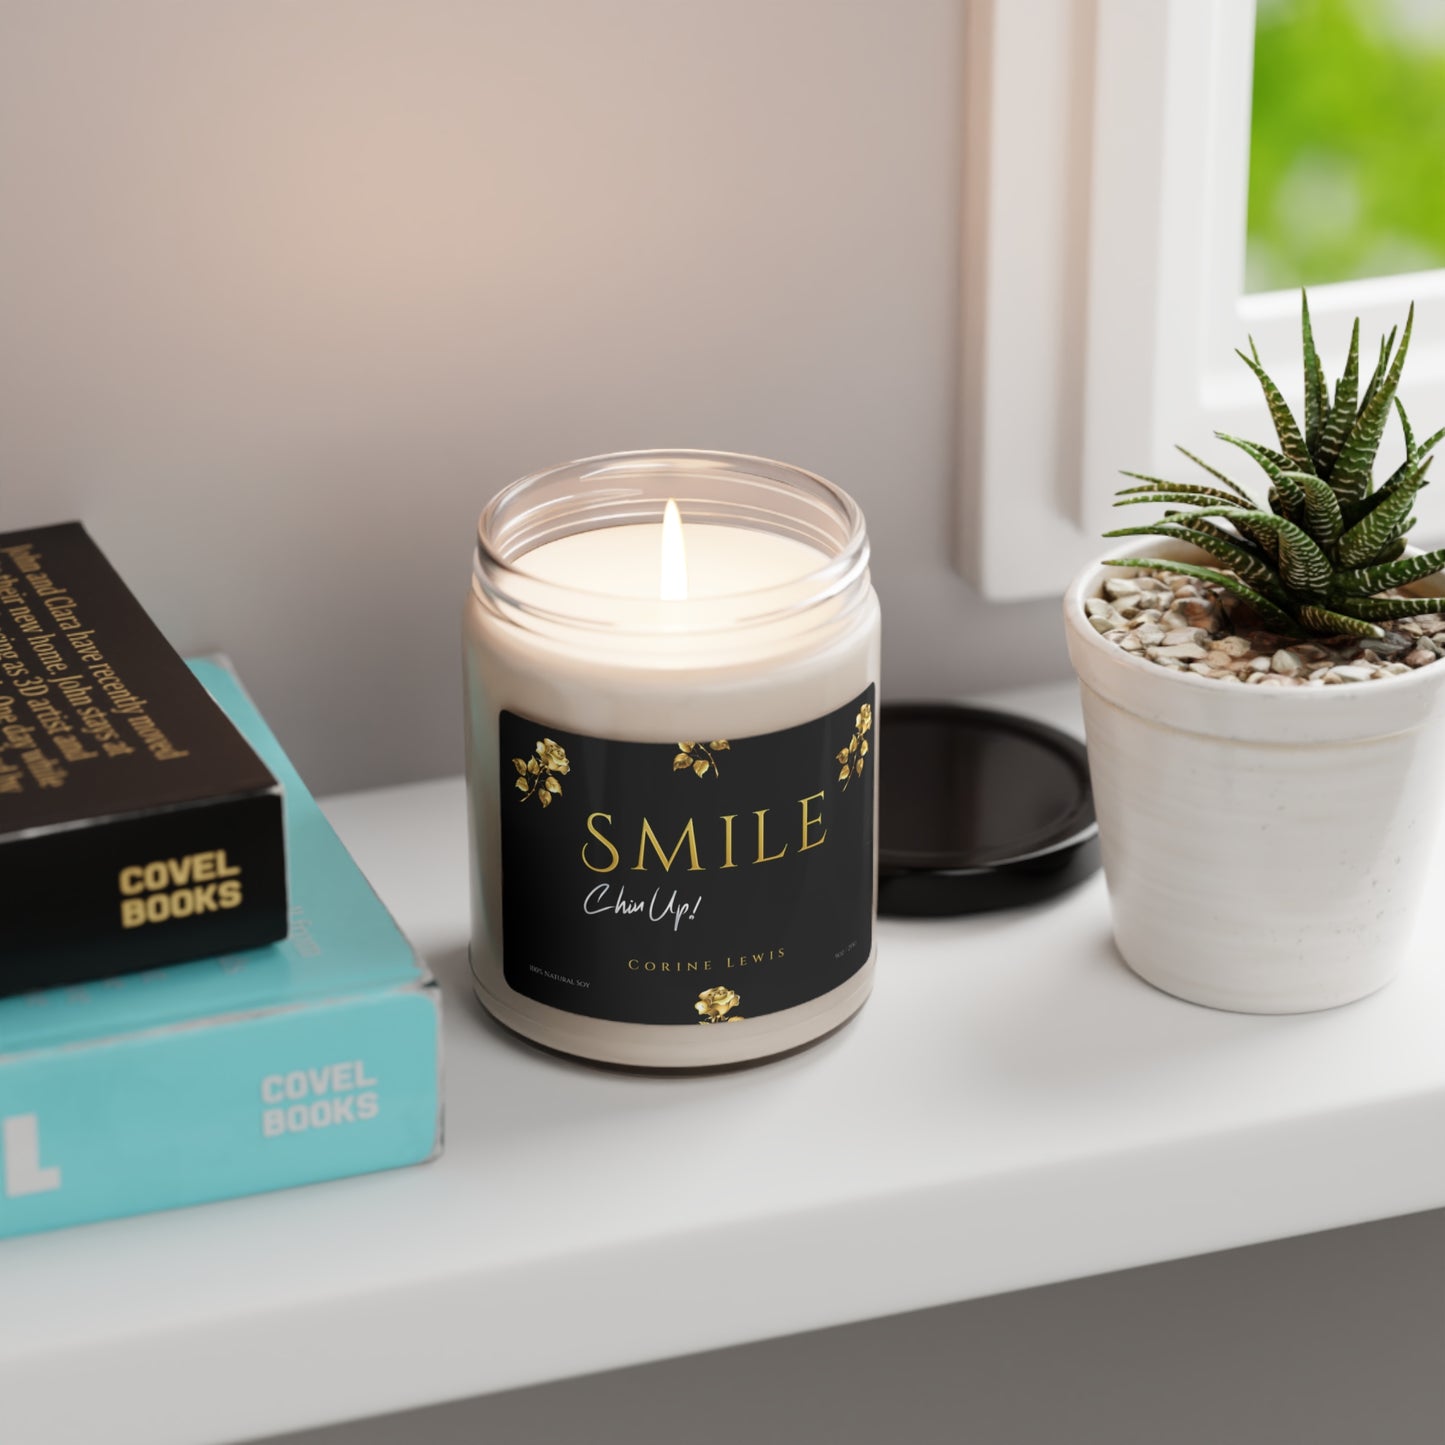 SMILE, Chin UP! Scented Soy Candle, 9oz